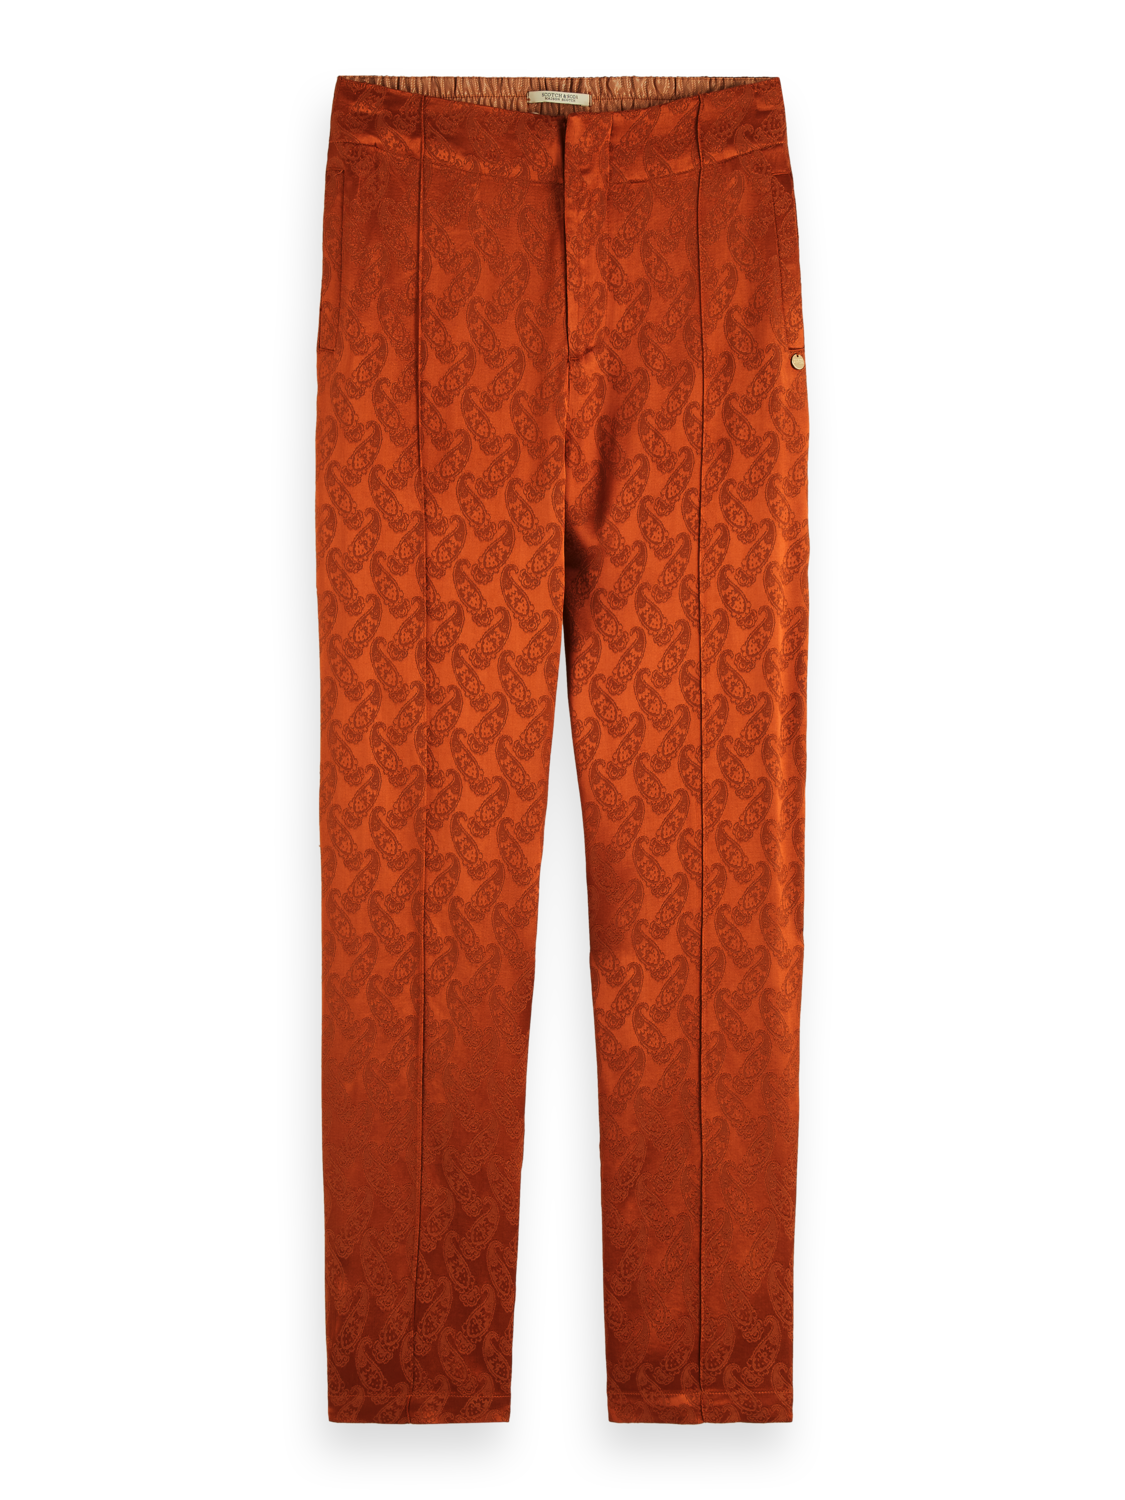 Scotch & Soda Tailored Pants In Paisley Jacquard